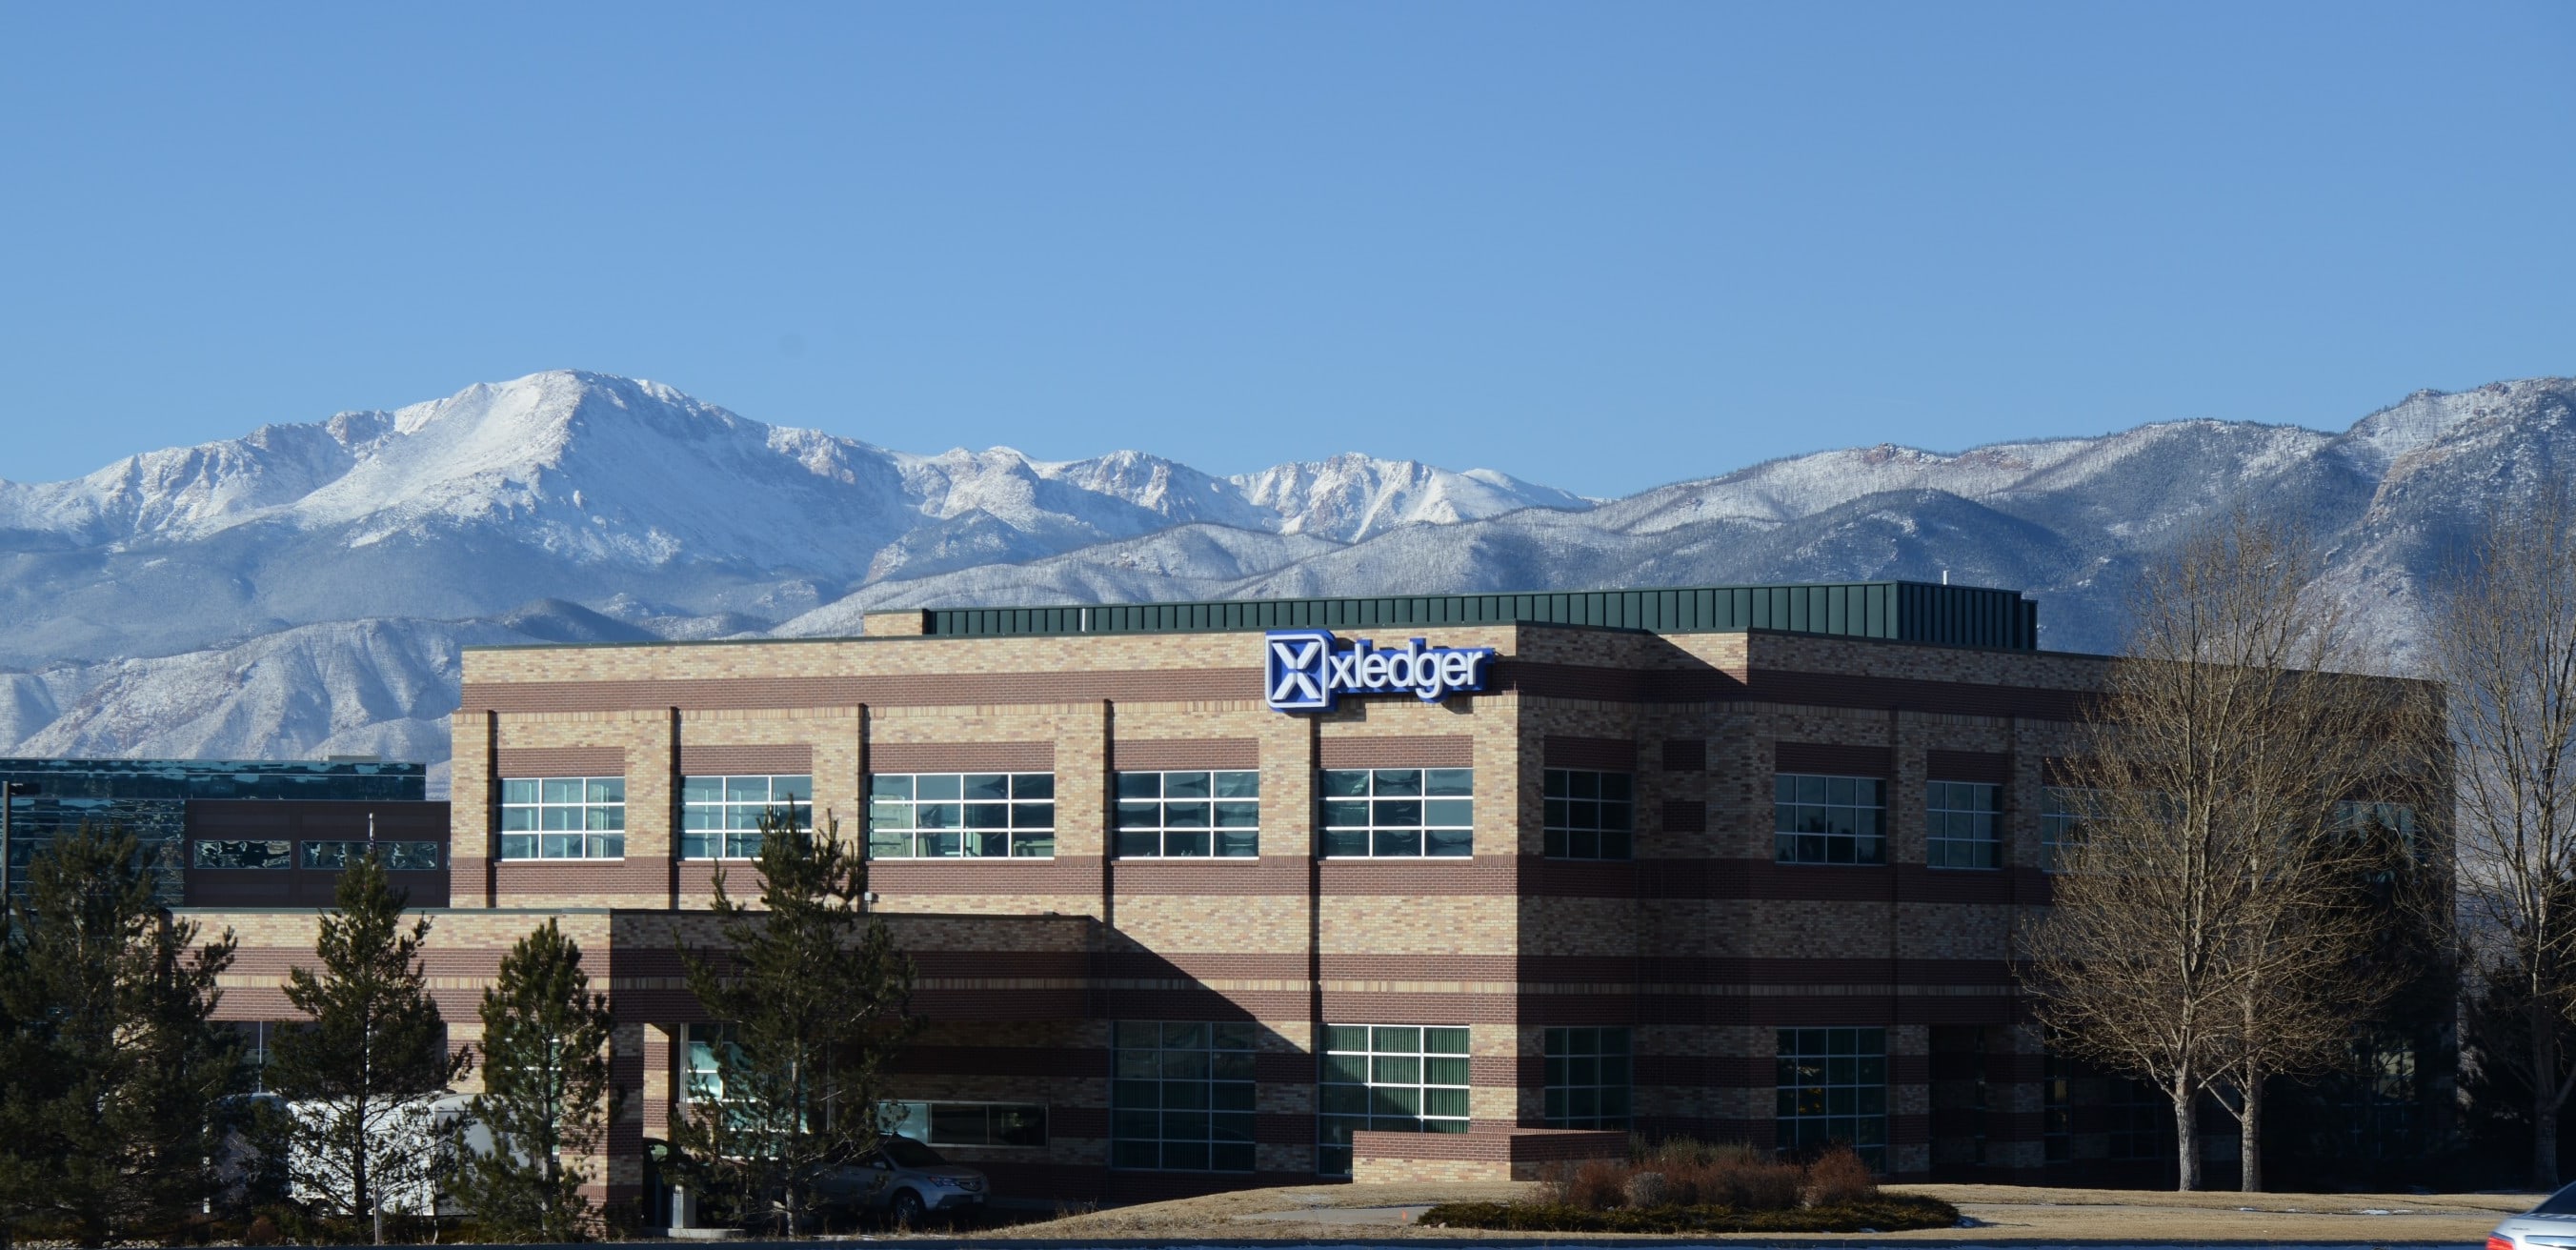 Xledger Inc office building with Mt Pikes Peak, Americas Mountain,  in the background